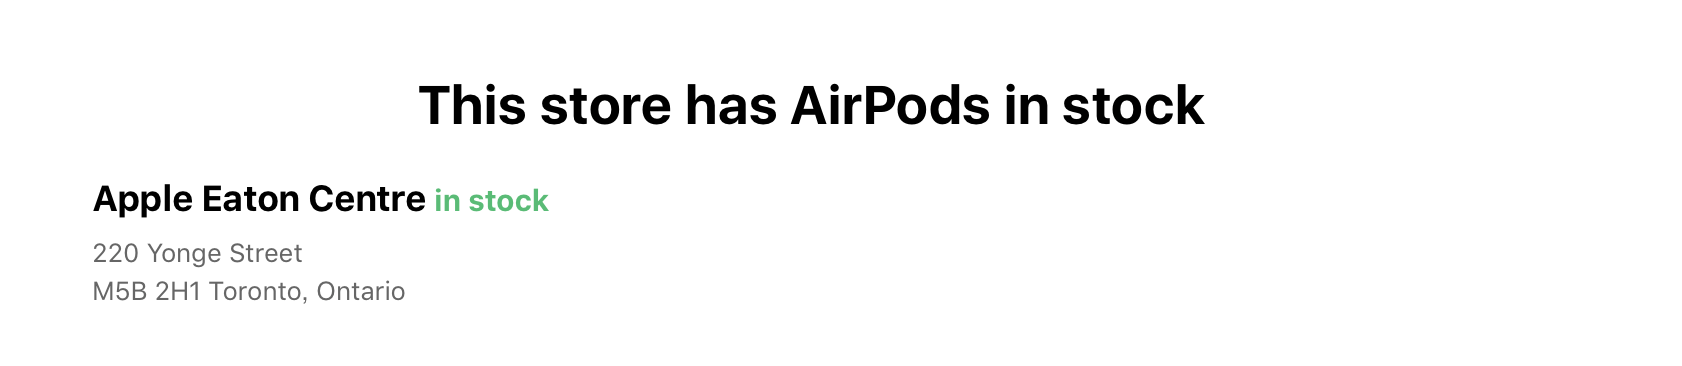 3_airpods (1)